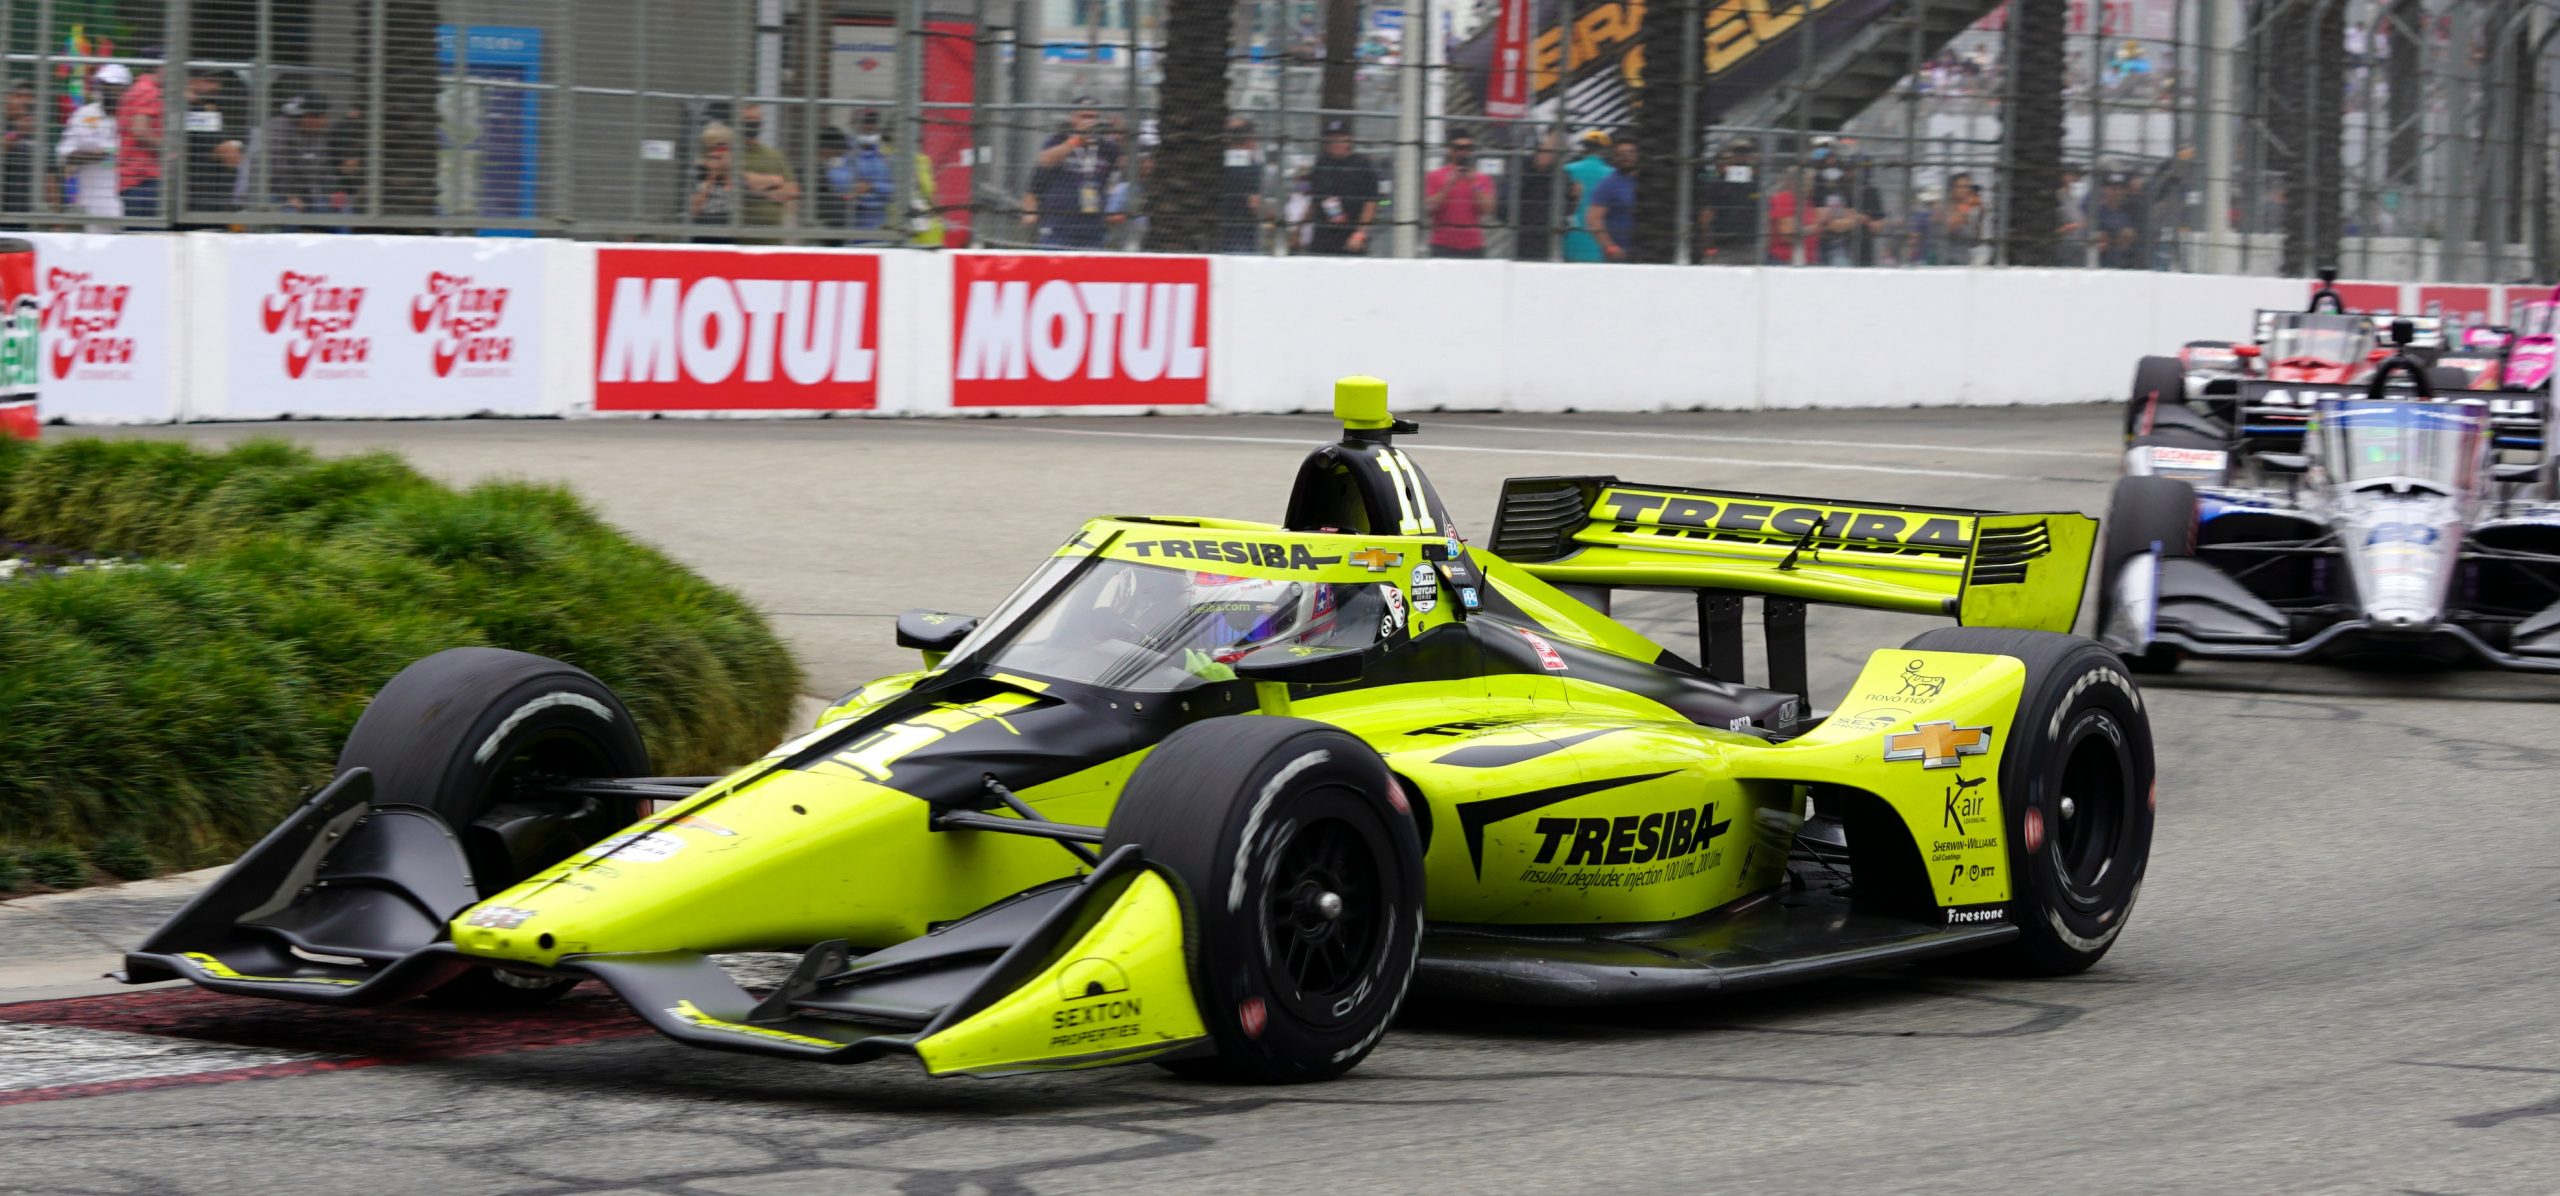 Kimball leads Conor Daly and Rinus VeeKay heading into Turn 2 during the race where he would eventually finish 18th.